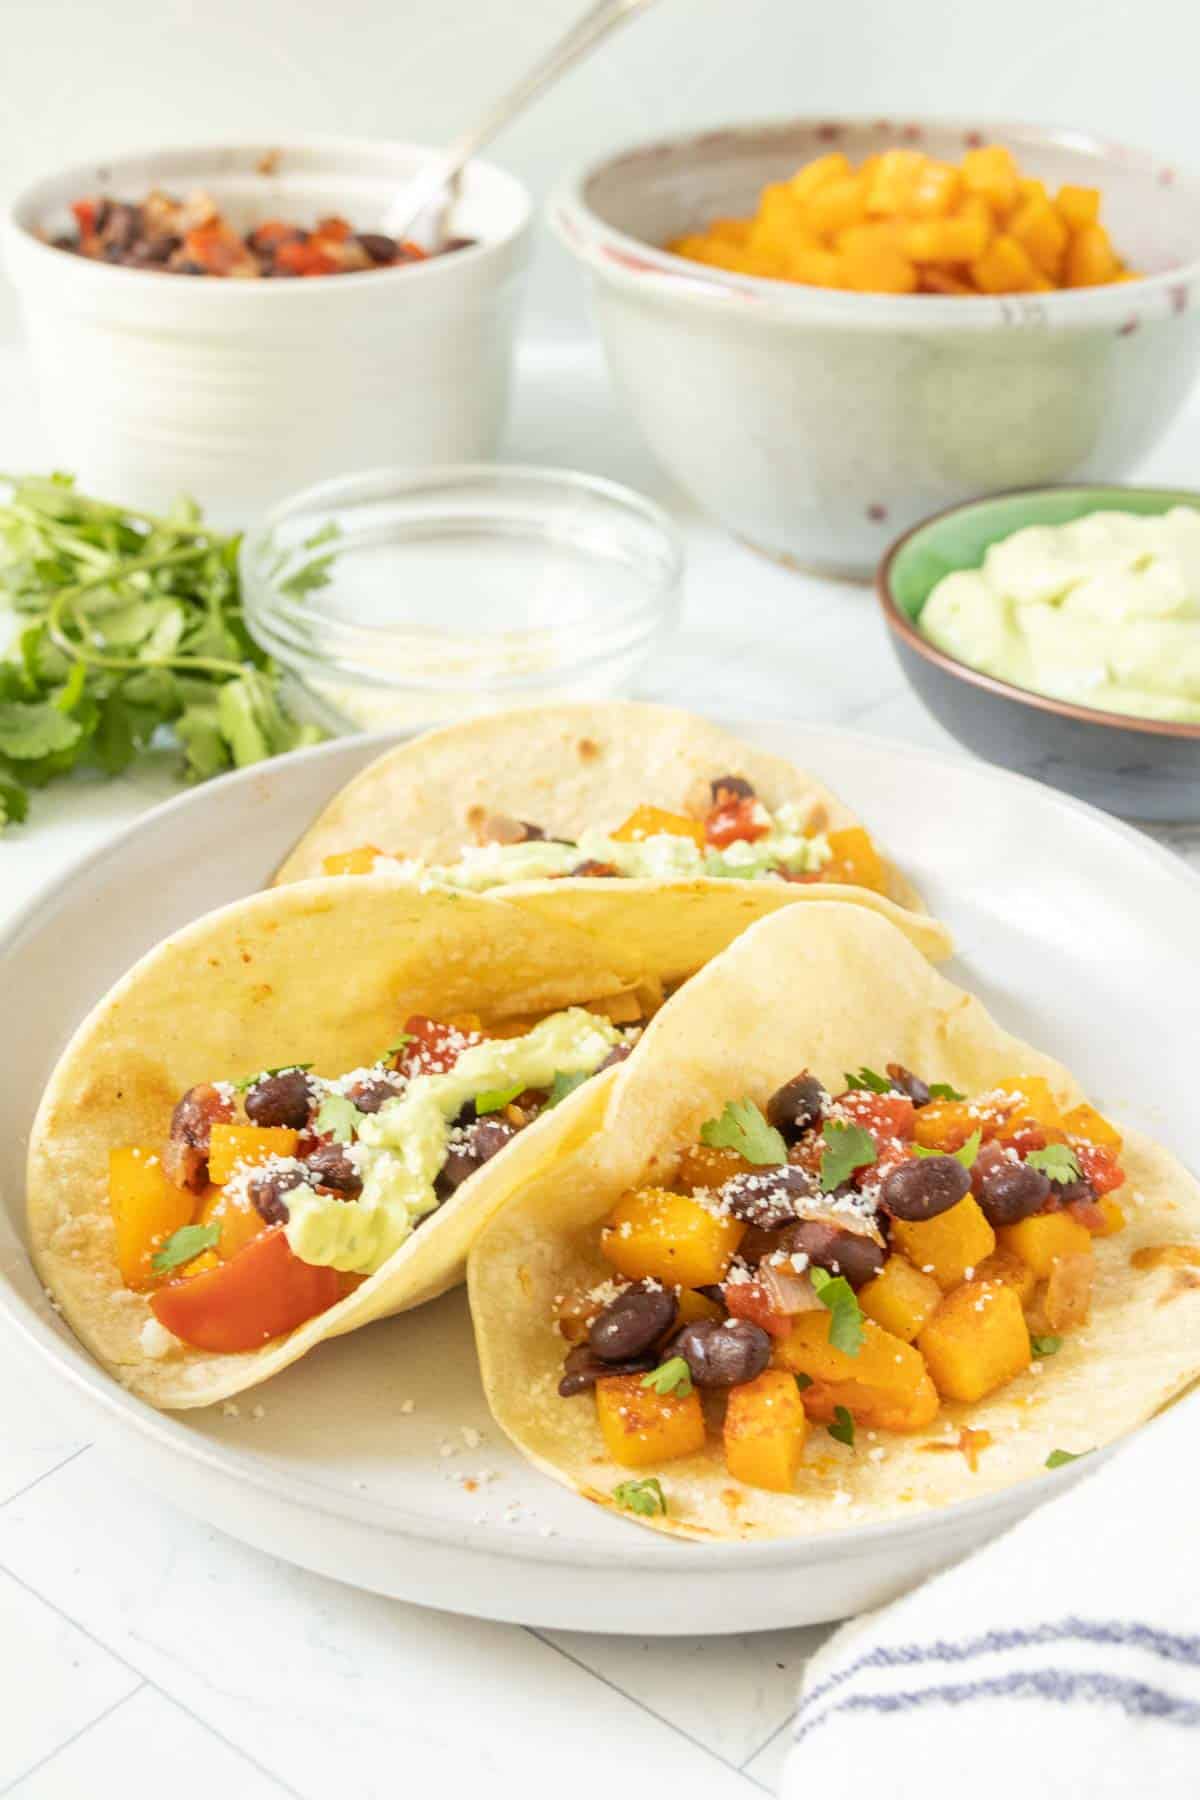 Tacos with black beans and avocado on a plate.